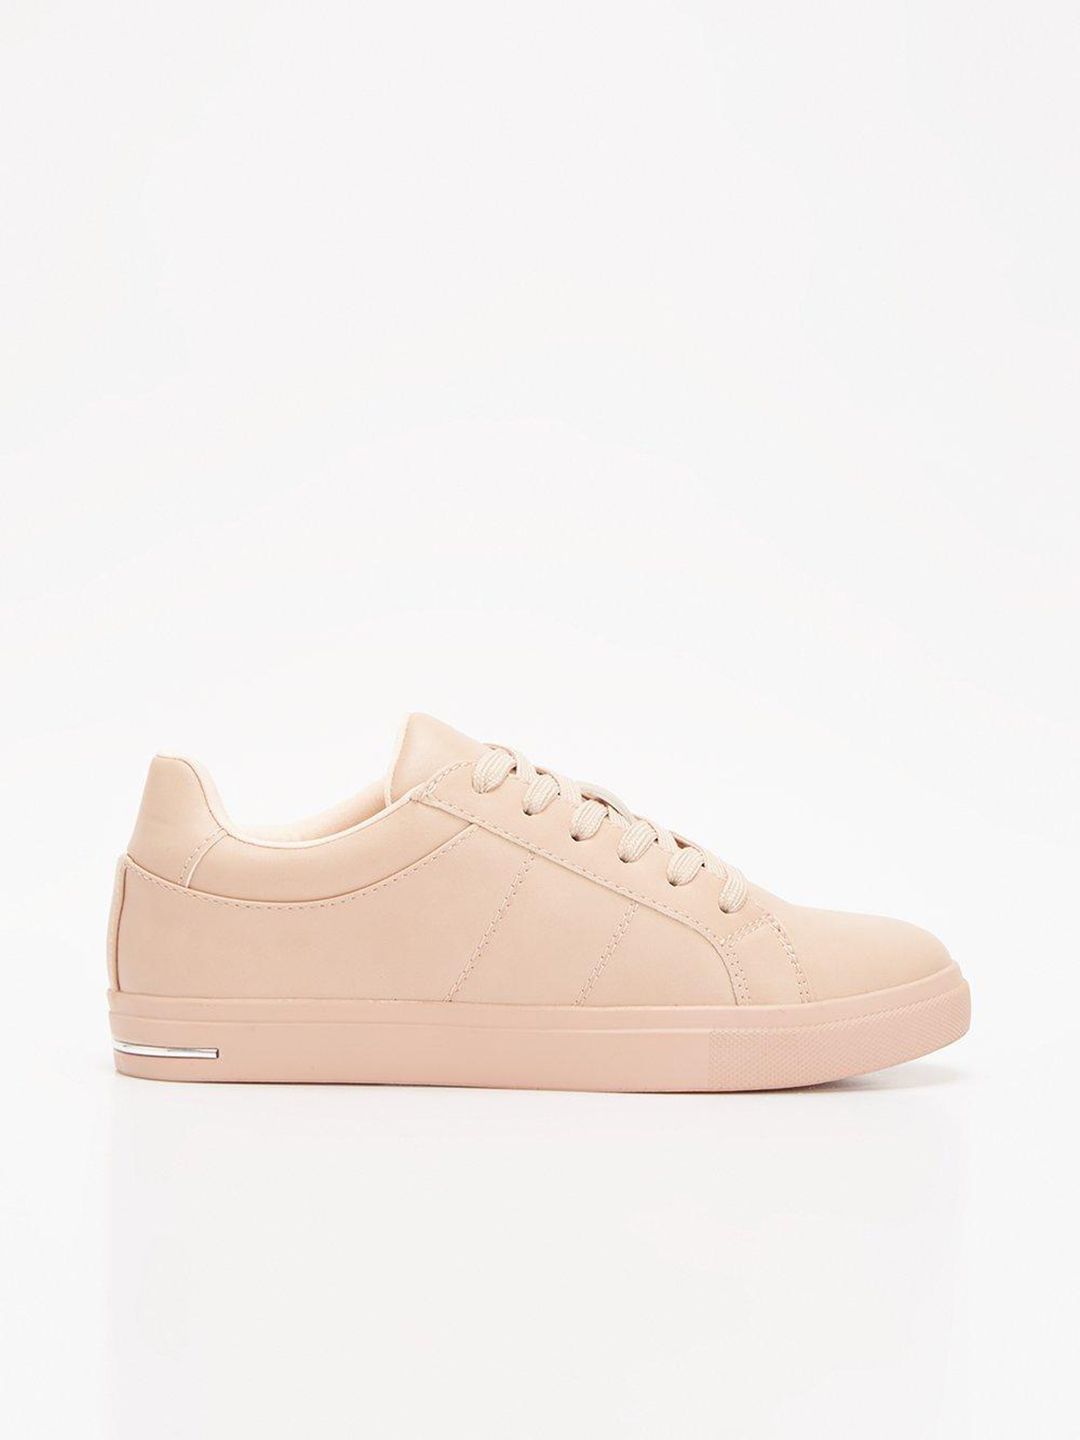 DOROTHY PERKINS Women Lace Up Sneakers Price in India